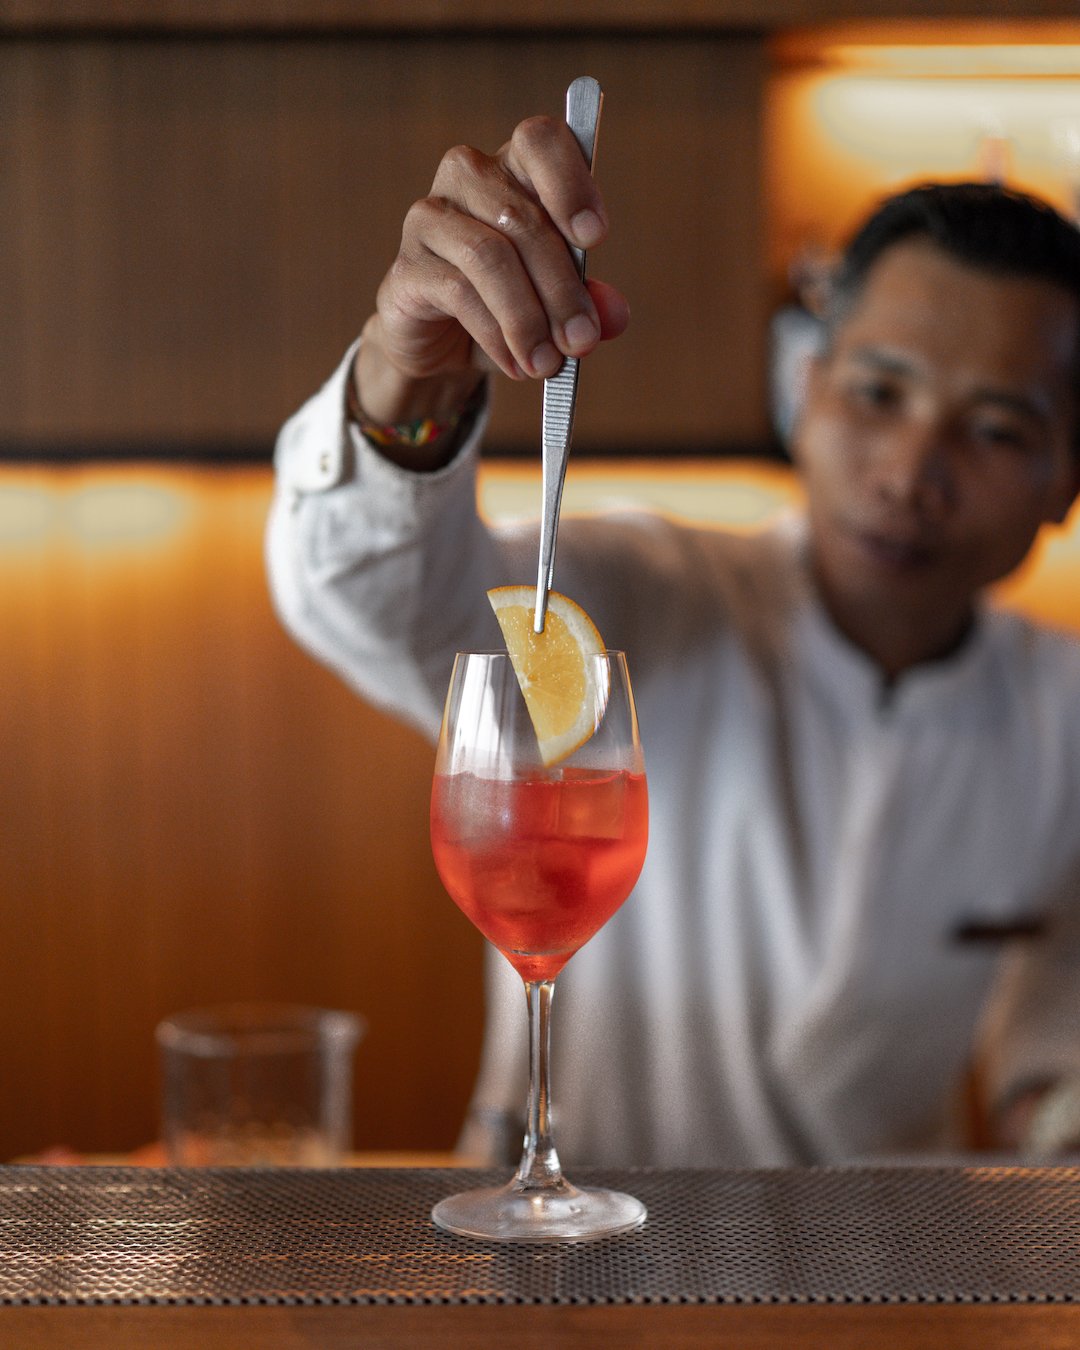 Indulge in the art of mixology at Embers, where our talented barmen create cocktails that are delicious. Join us for a drink and let the evening unfold in style. 🍸🔥

Book A Table
7 AM to 10 PM Daily
Call +623619088888
WA +6281239736247
Click the li